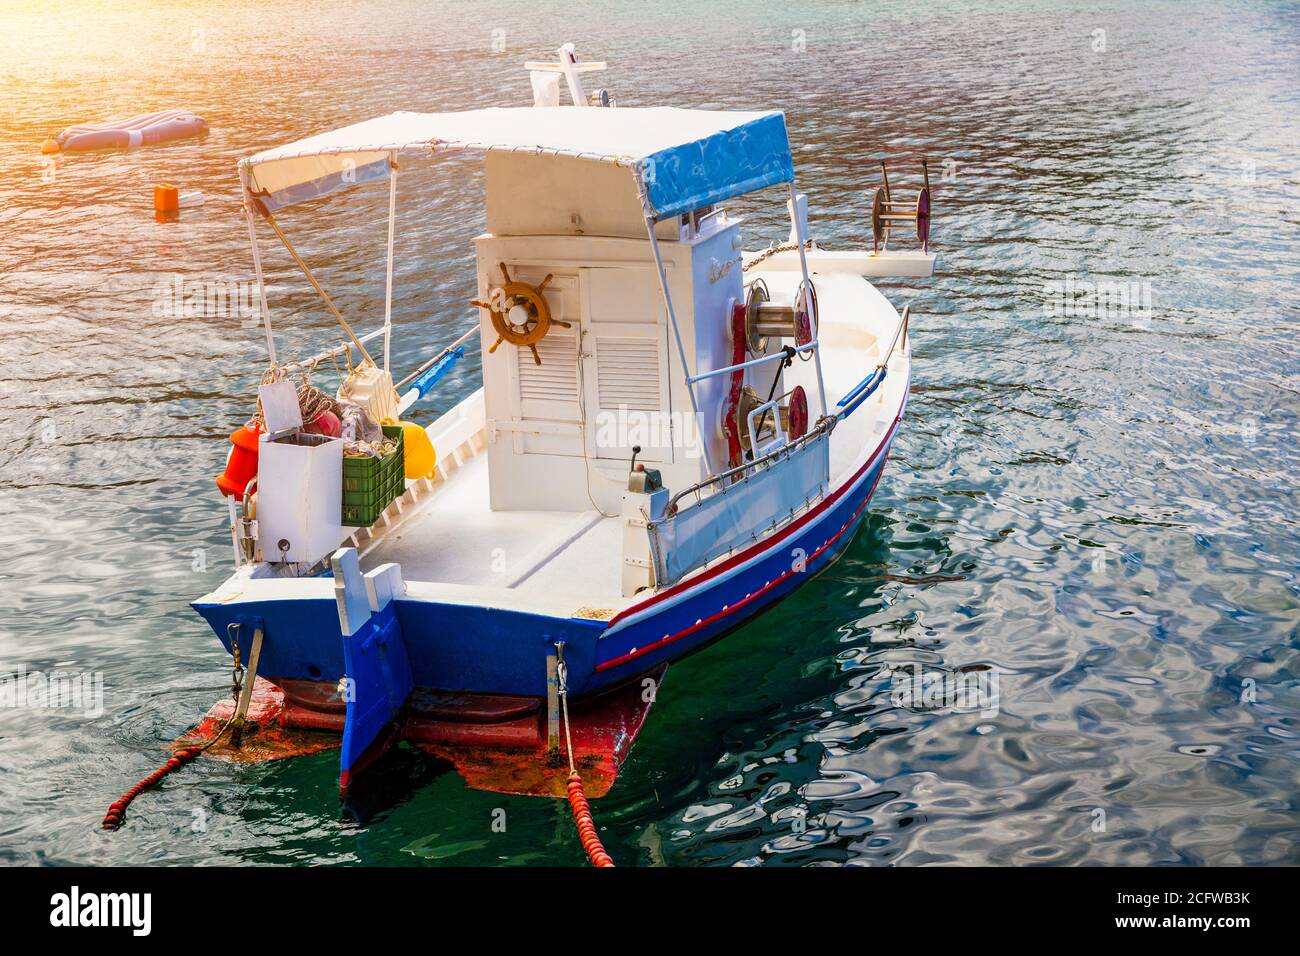 https://c8.alamy.com/comp/2CFWB3K/vintage-wooden-boat-in-coral-sea-boat-drone-photo-fishing-boats-in-clear-turquoise-ocean-top-view-small-fishing-boat-moored-in-blue-clean-transpar-2CFWB3K.jpg